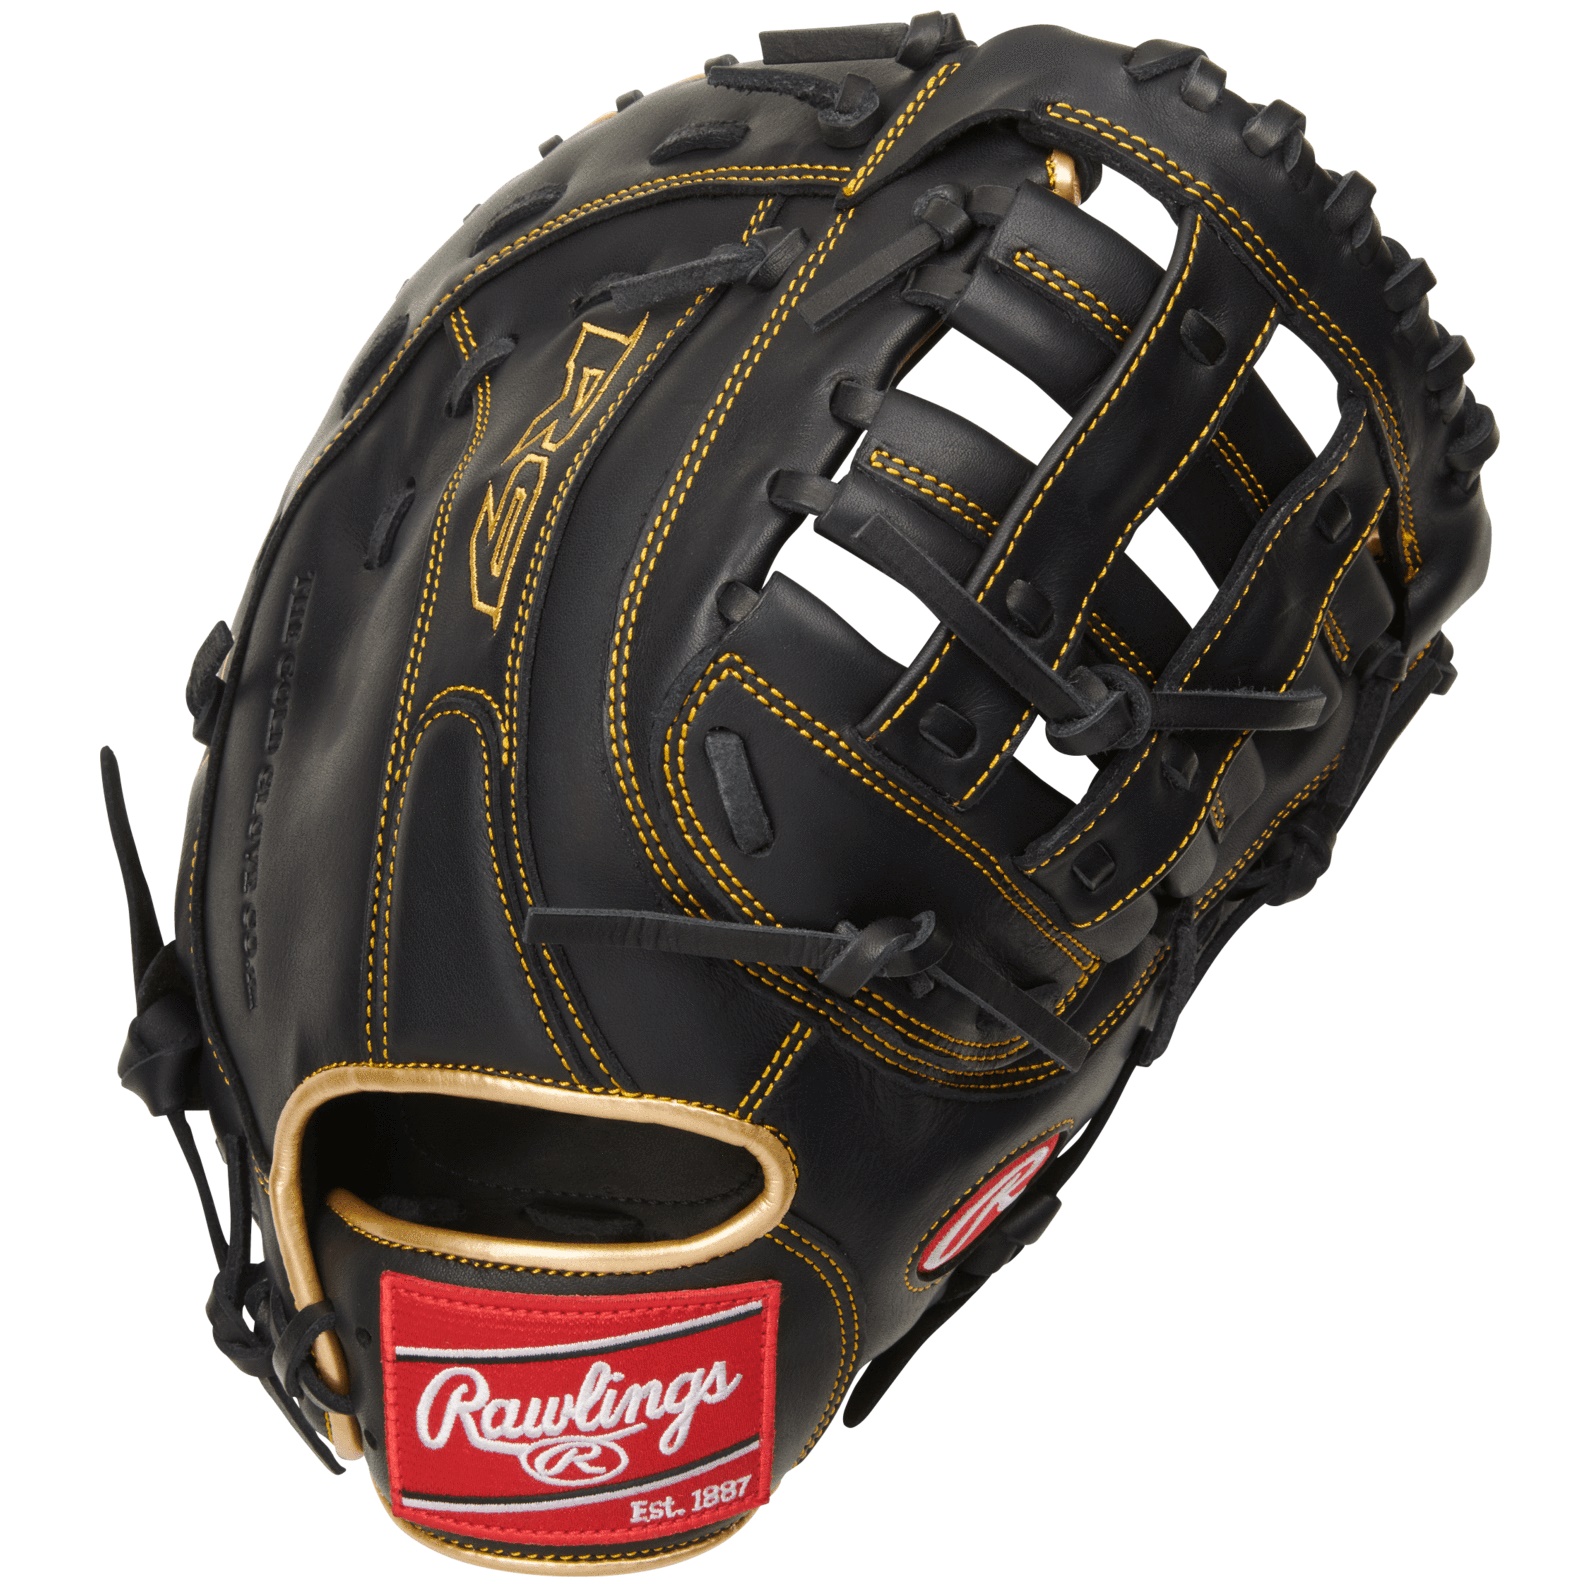 rawlings-r9-series-baseball-first-base-mitt-mod-pro-h-web-12-5-inch-right-hand-throw R9FM18BG-RightHandThrow Rawlings  The 2021 R9 series 12.5-inch first base mitt was crafted with